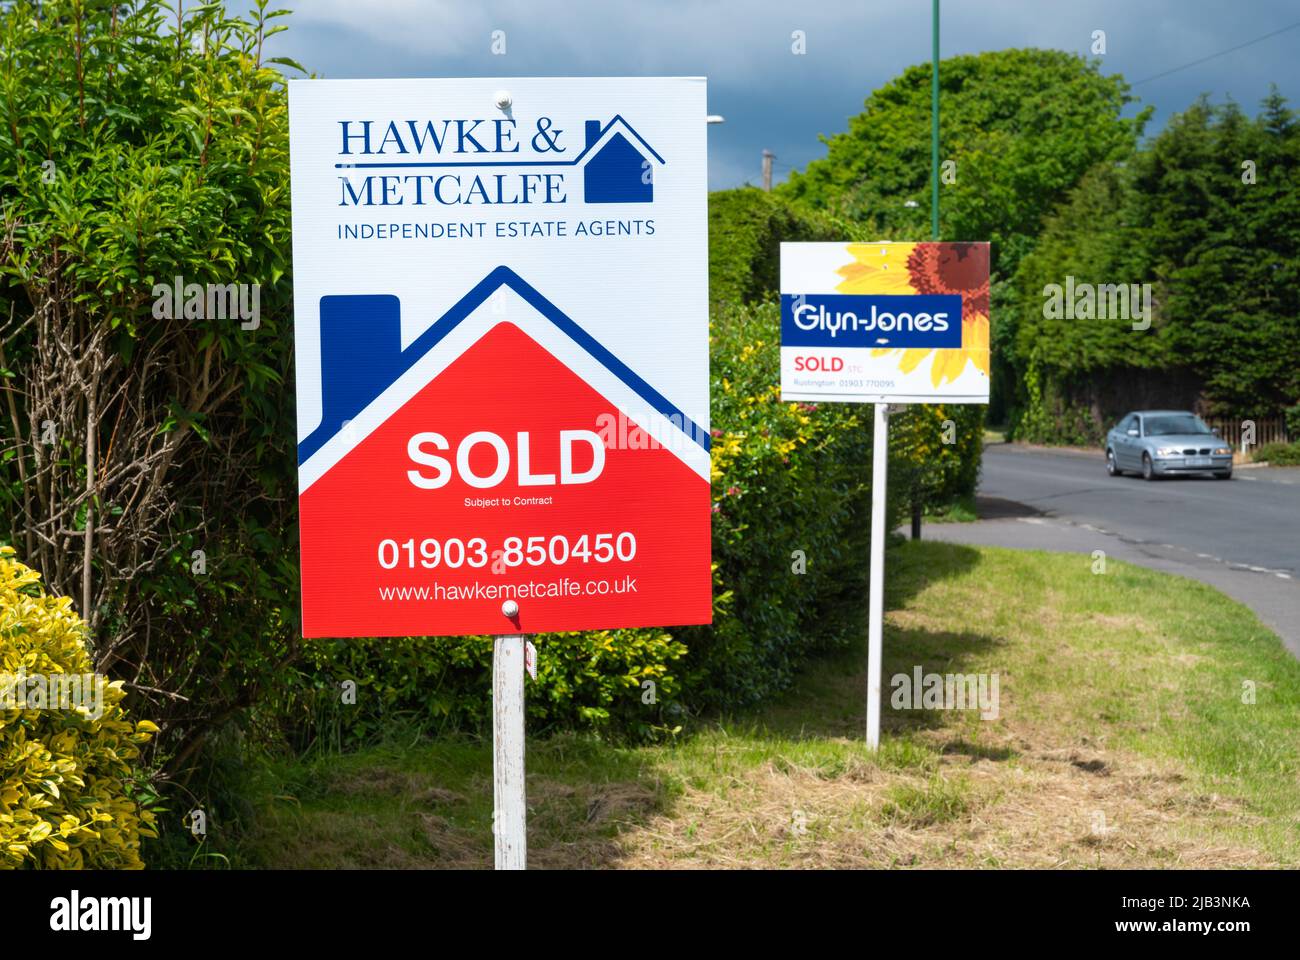 Estate agent sign (Hawke & Metcalfe) and another for Glyn Jones estate agents showing houses or properties sold. House sold signs in England, UK. Stock Photo